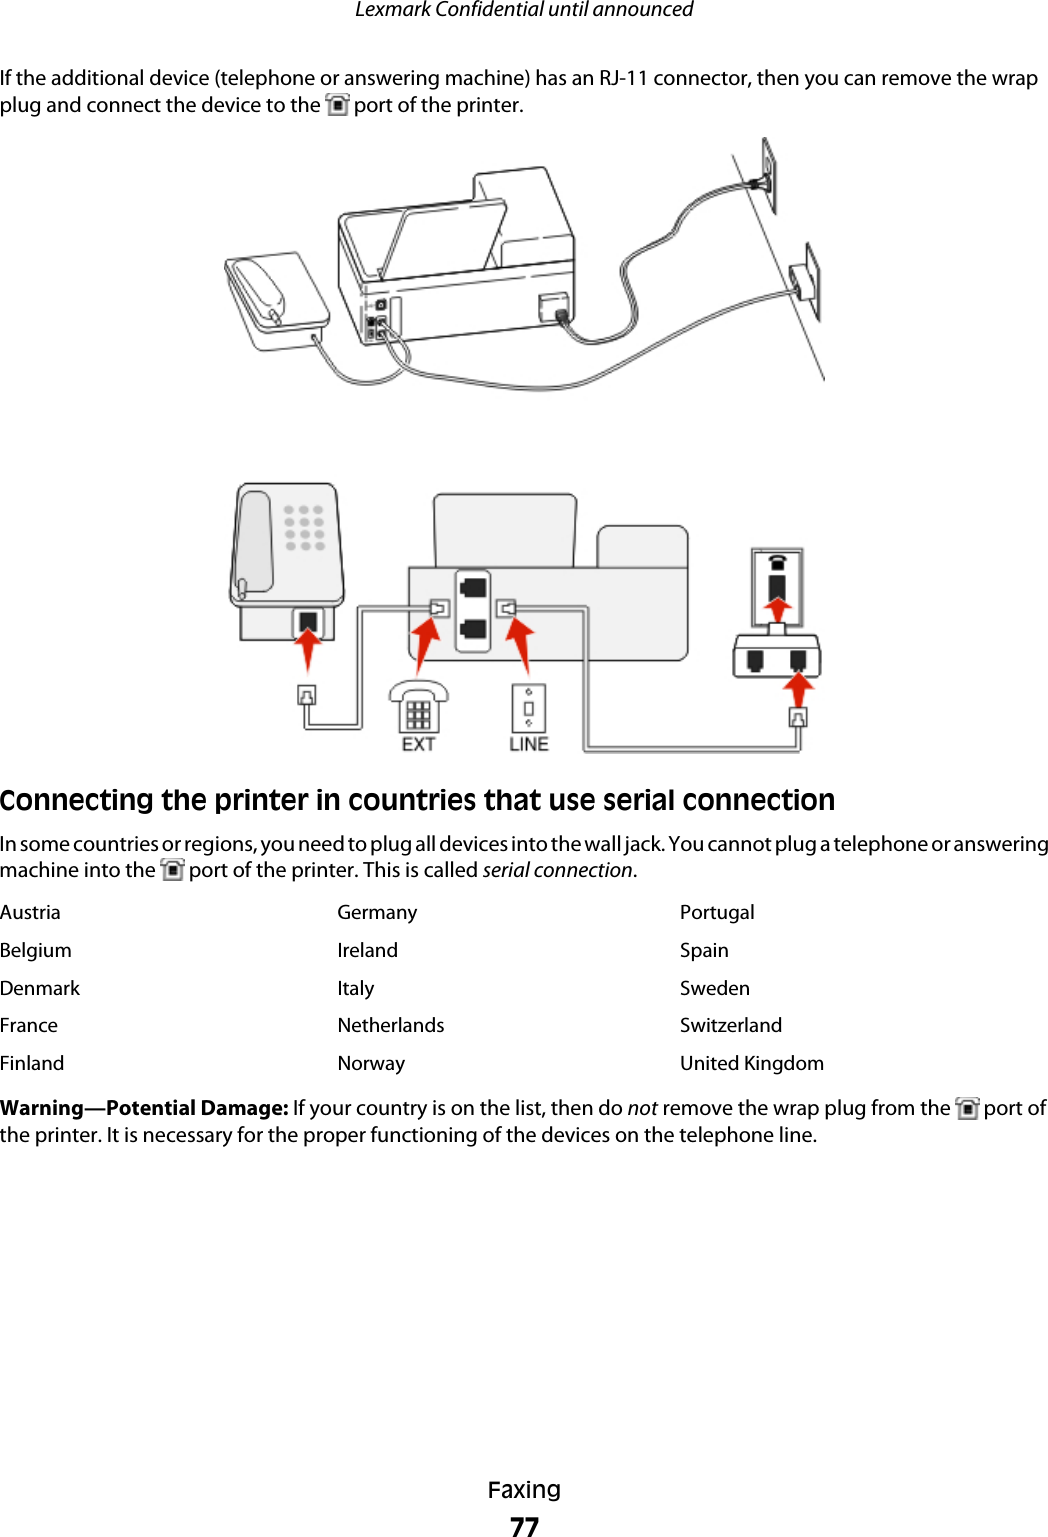 If the additional device (telephone or answering machine) has an RJ-11 connector, then you can remove the wrapplug and connect the device to the   port of the printer.Connecting the printer in countries that use serial connectionIn some countries or regions, you need to plug all devices into the wall jack. You cannot plug a telephone or answeringmachine into the   port of the printer. This is called serial connection.Austria Germany PortugalBelgium Ireland SpainDenmark Italy SwedenFrance Netherlands SwitzerlandFinland Norway United KingdomWarning—Potential Damage: If your country is on the list, then do not remove the wrap plug from the   port ofthe printer. It is necessary for the proper functioning of the devices on the telephone line.Lexmark Confidential until announcedFaxing77